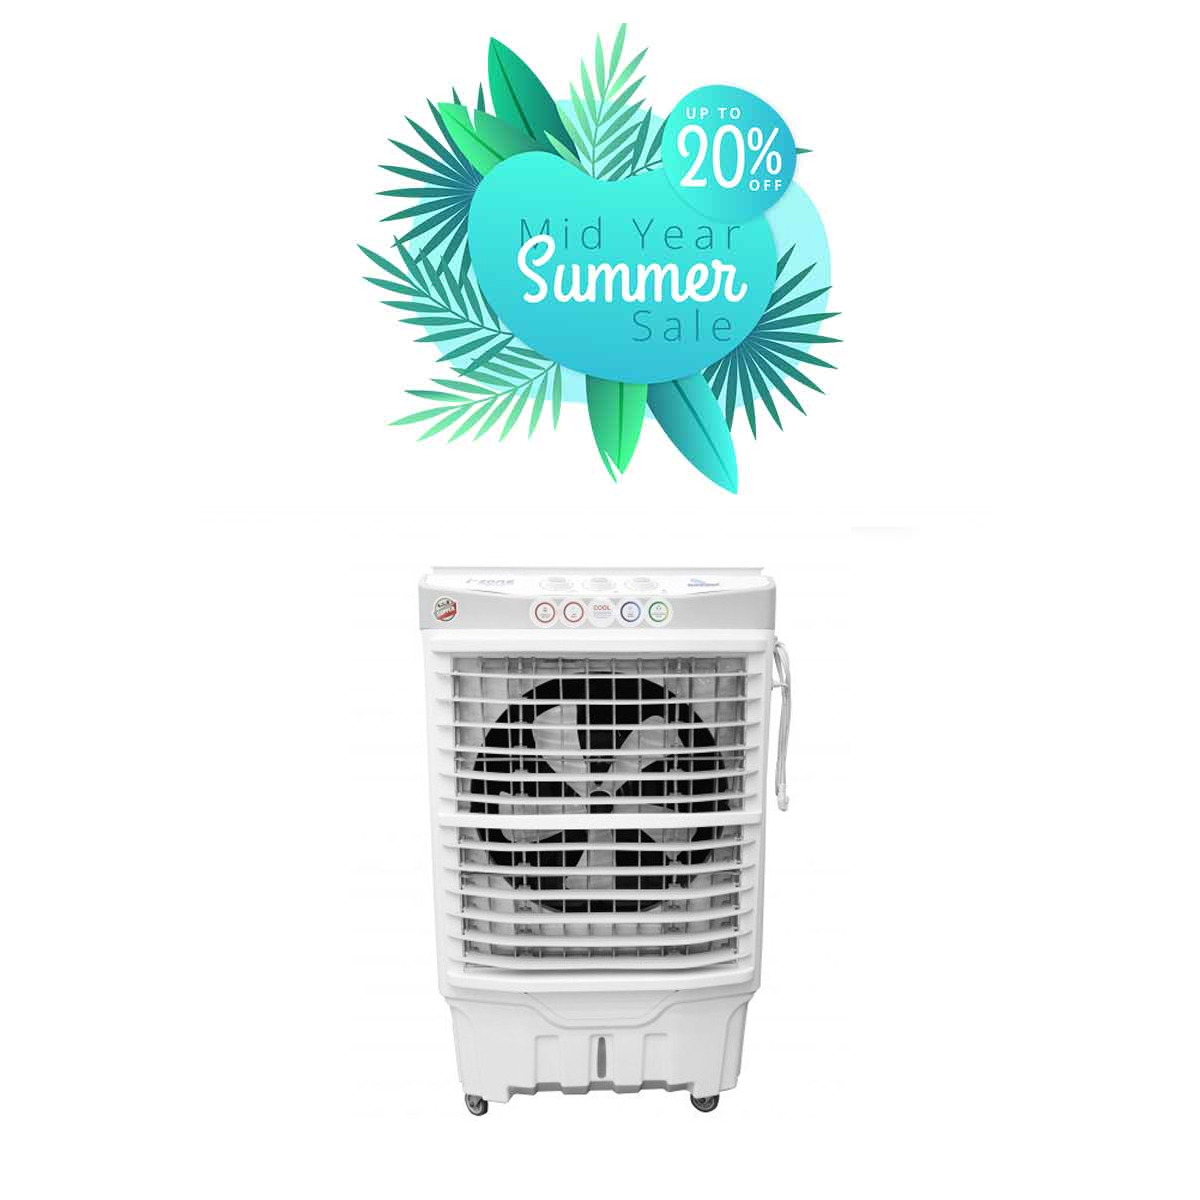 i-zoneGB-13000 White & Grey Copper Pad Room Air Cooler